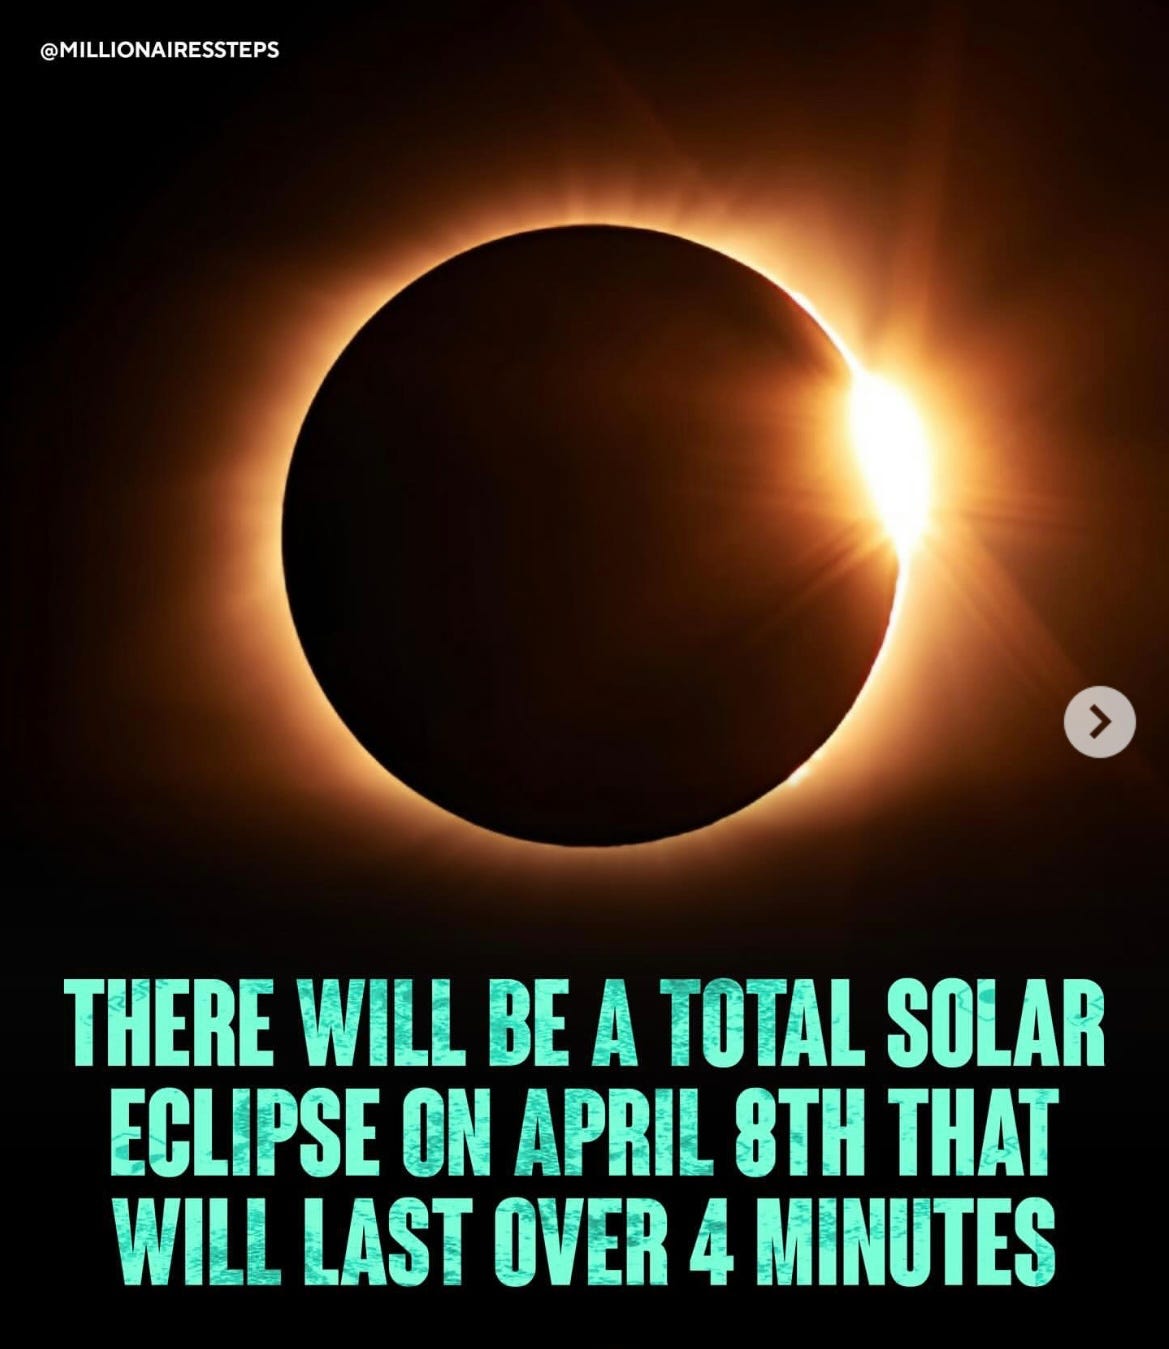 Ready Set Sun! Solar Eclipse on April 8th that will last over 4 minute